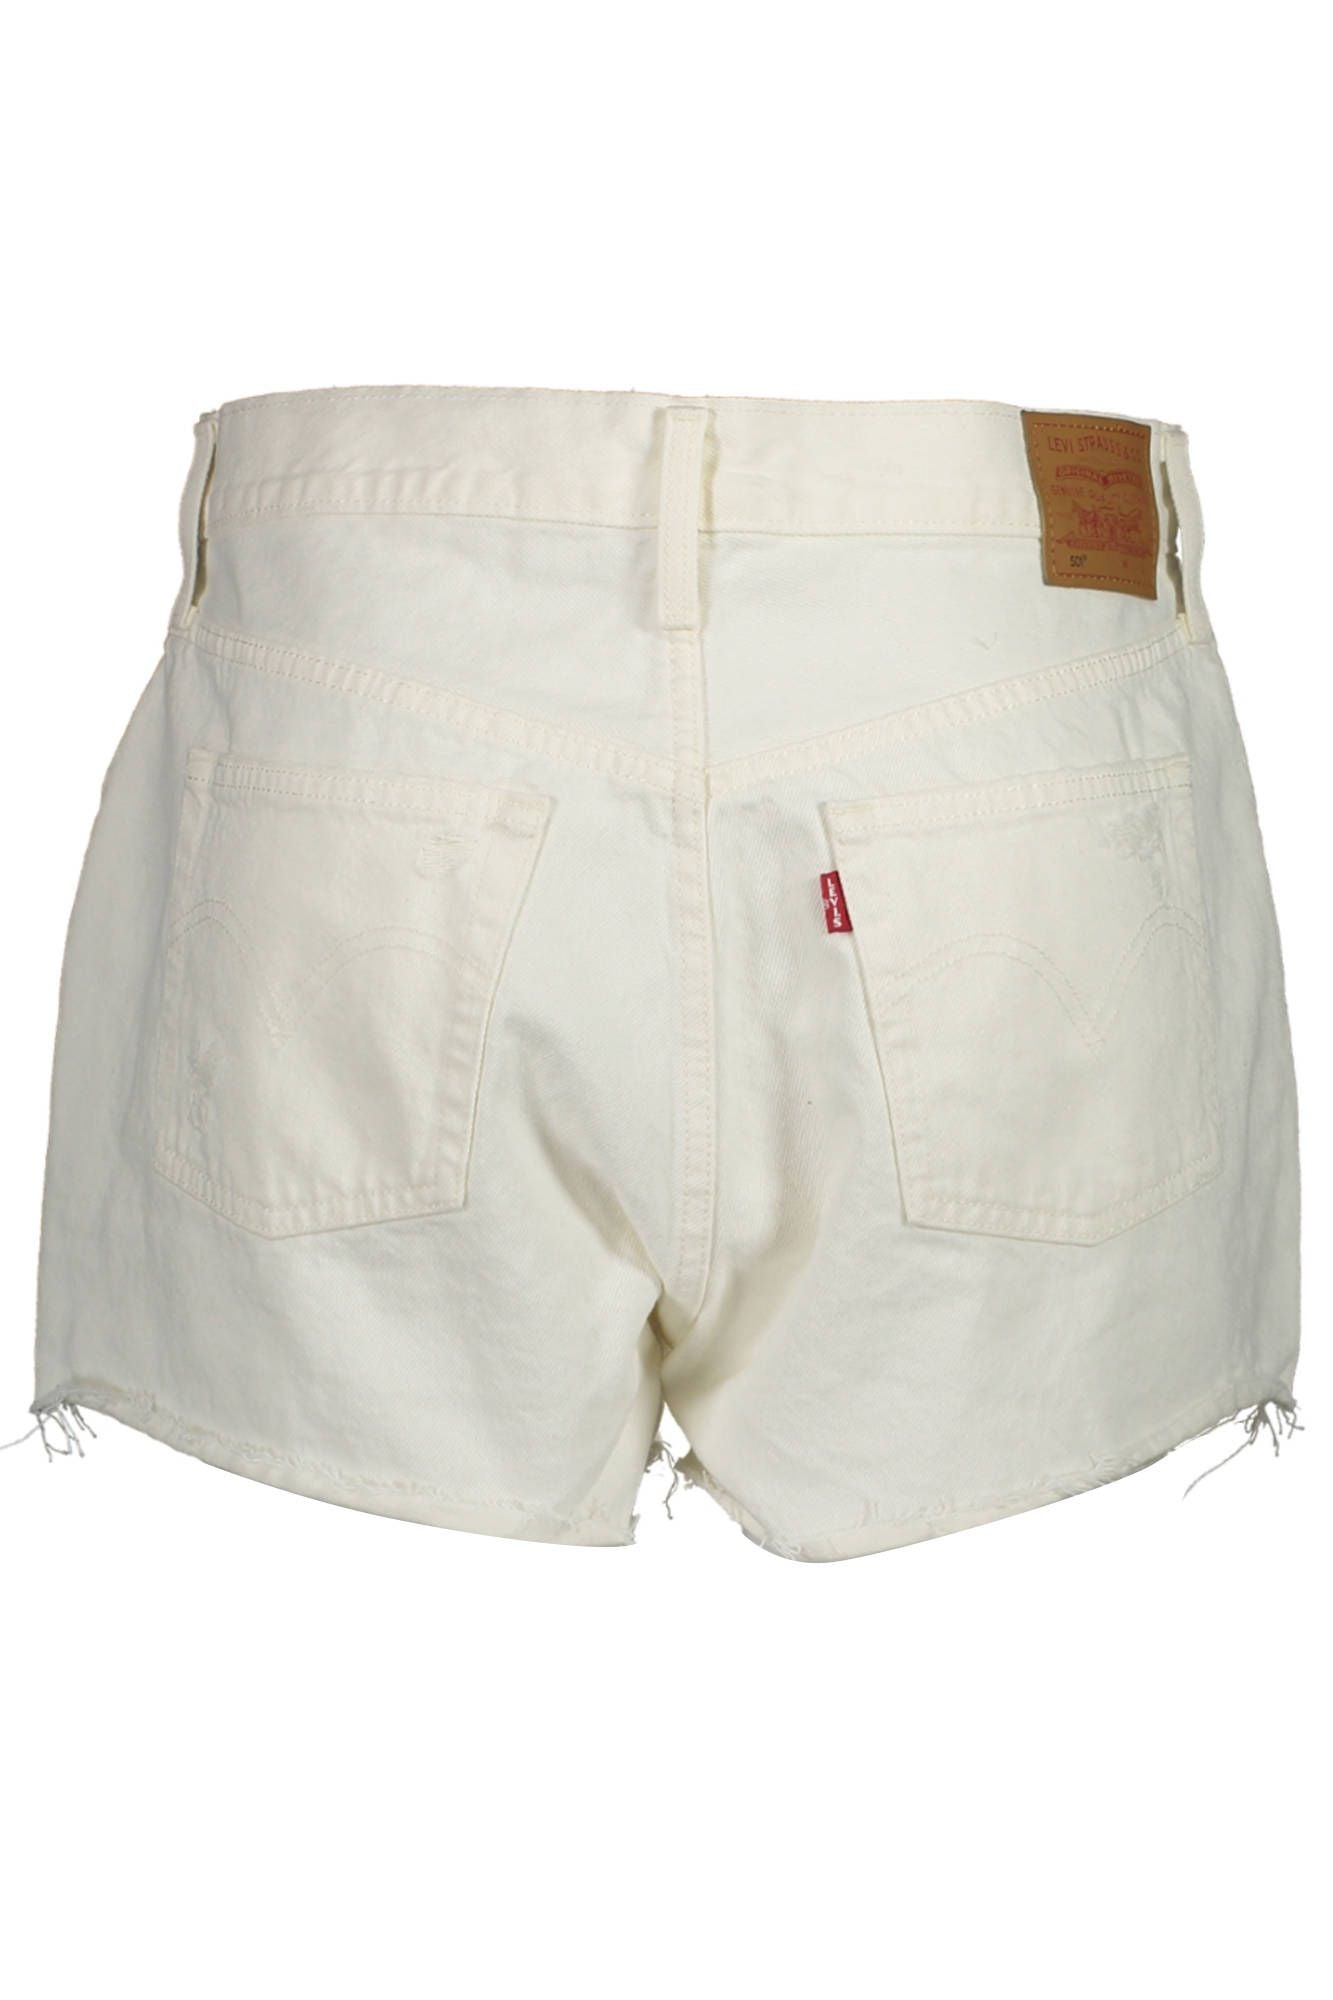 Chic White Denim Shorts with Classic Appeal - Divitiae Glamour